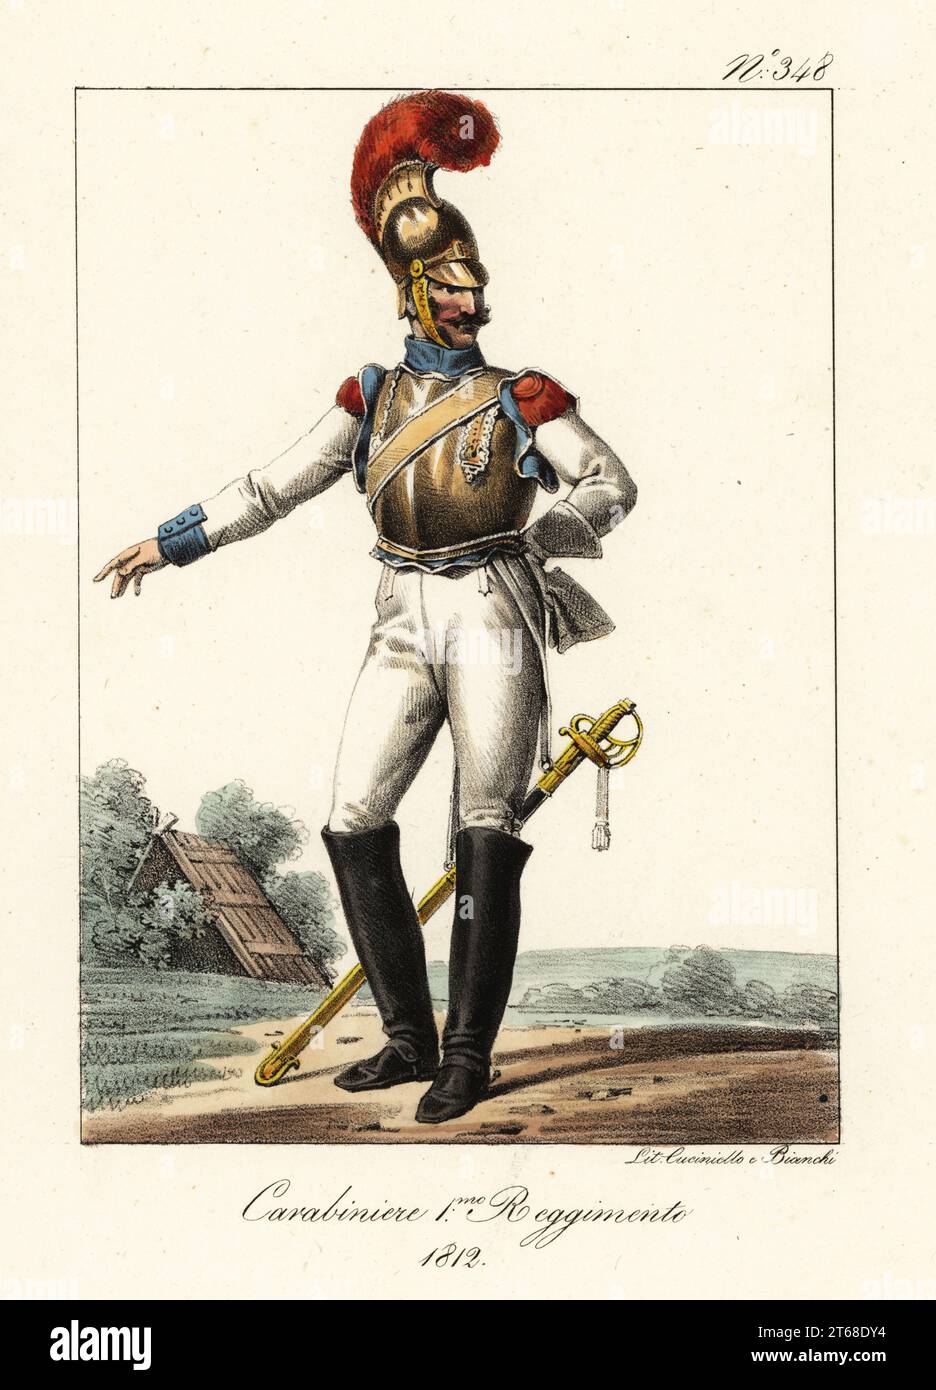 Uniform of the 1st Regiment of Carabiniers-a-Cheval. He wears a copper dragoon's helmet with scarlet chenille, brass breastplate, white uniform, scarlet epaulettes, blue cuffs, boots, and sabre. Carabinier 1er Regiment, 1812. Handcoloured lithograph by Lorenzo Bianchi and Domenico Cuciniello after Hippolyte Lecomte from Costumi civili e militari della monarchia francese dal 1200 al 1820, Naples, 1825. Italian edition of Lecomtes Civilian and military costumes of the French monarchy from 1200 to 1820. Stock Photo